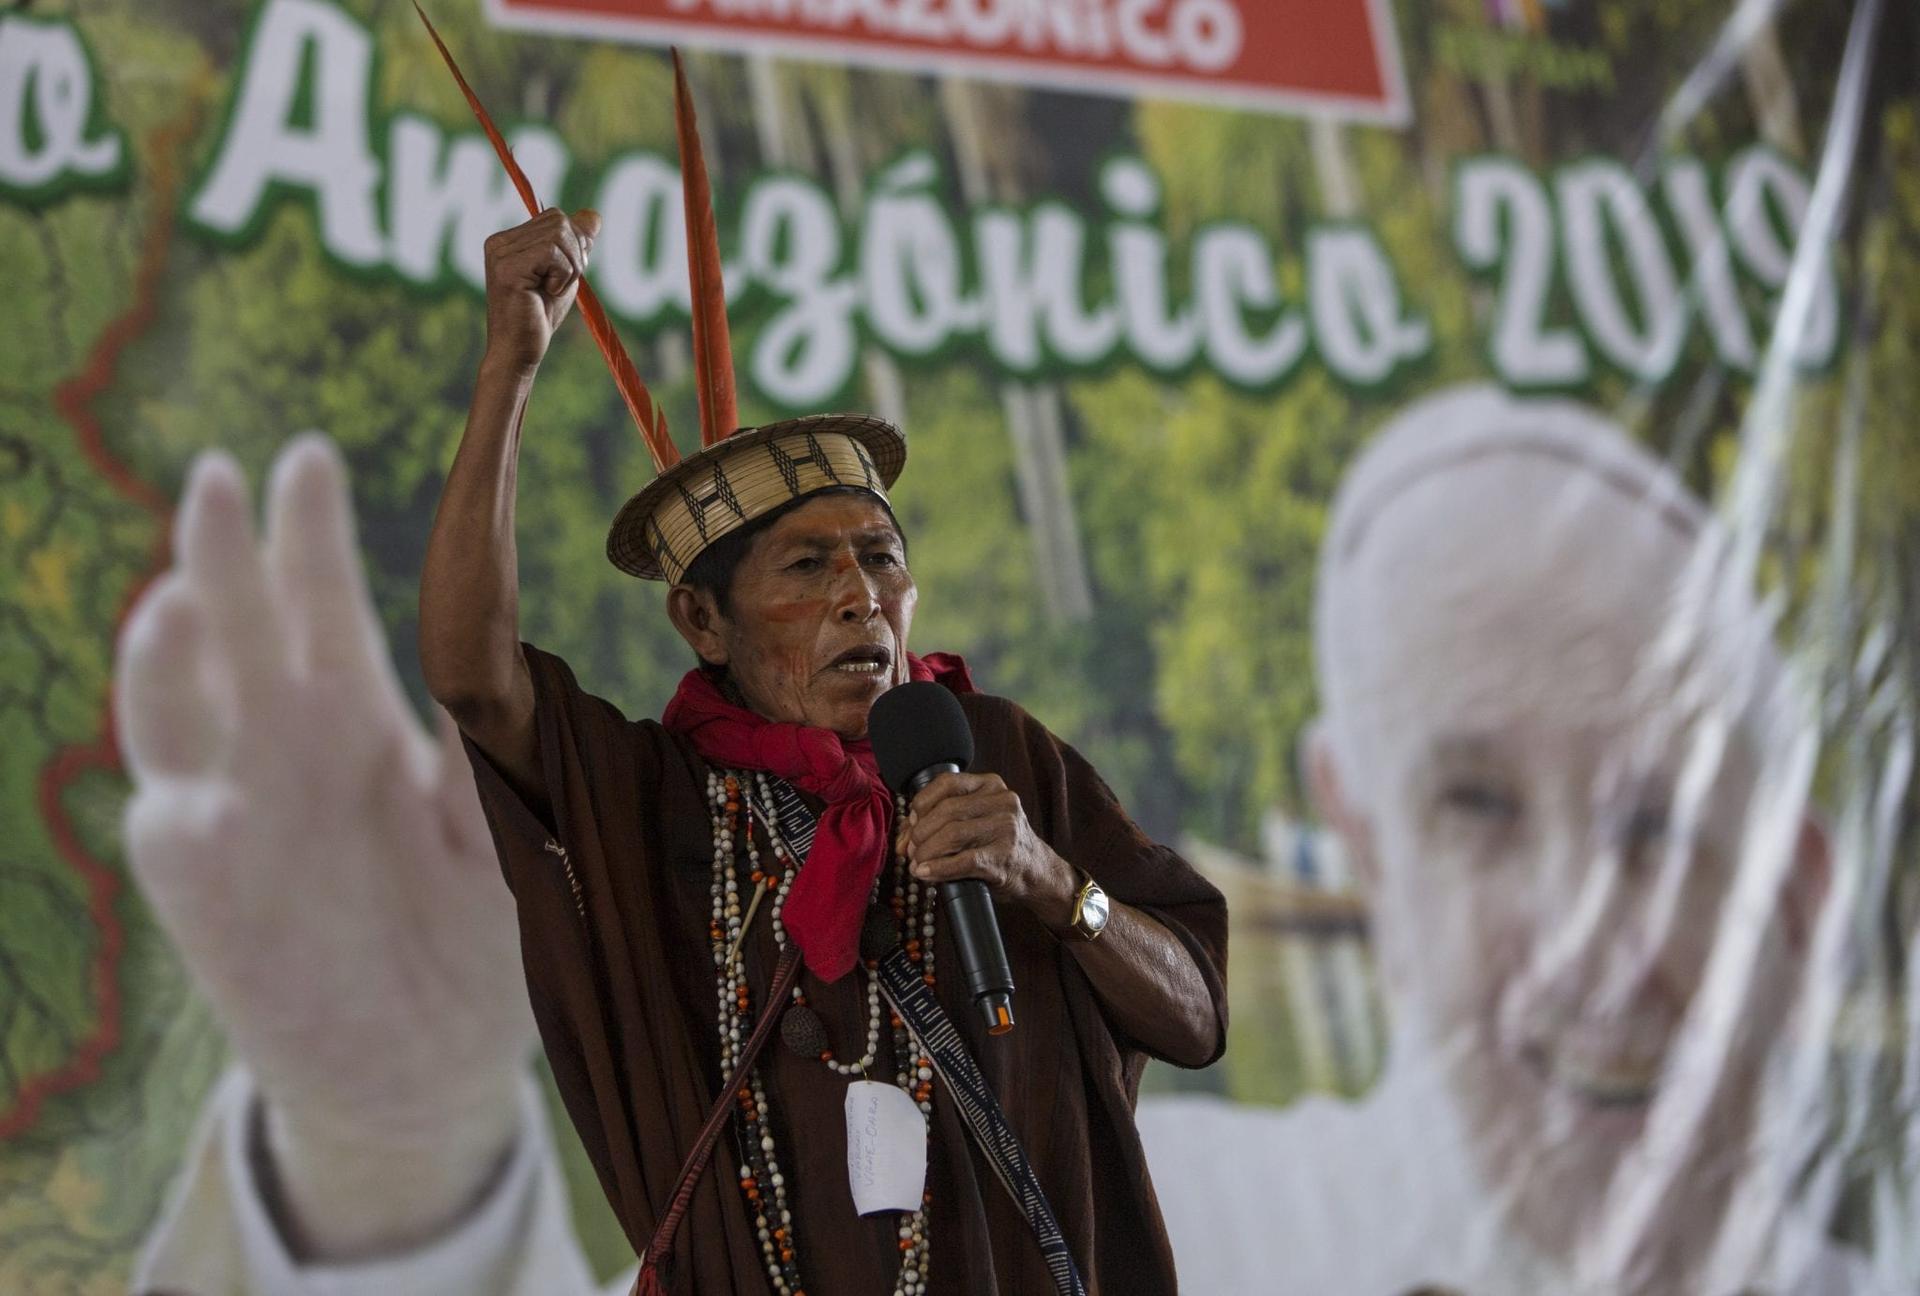 Peru’s indigenous await Pope Francis in scorching Amazon